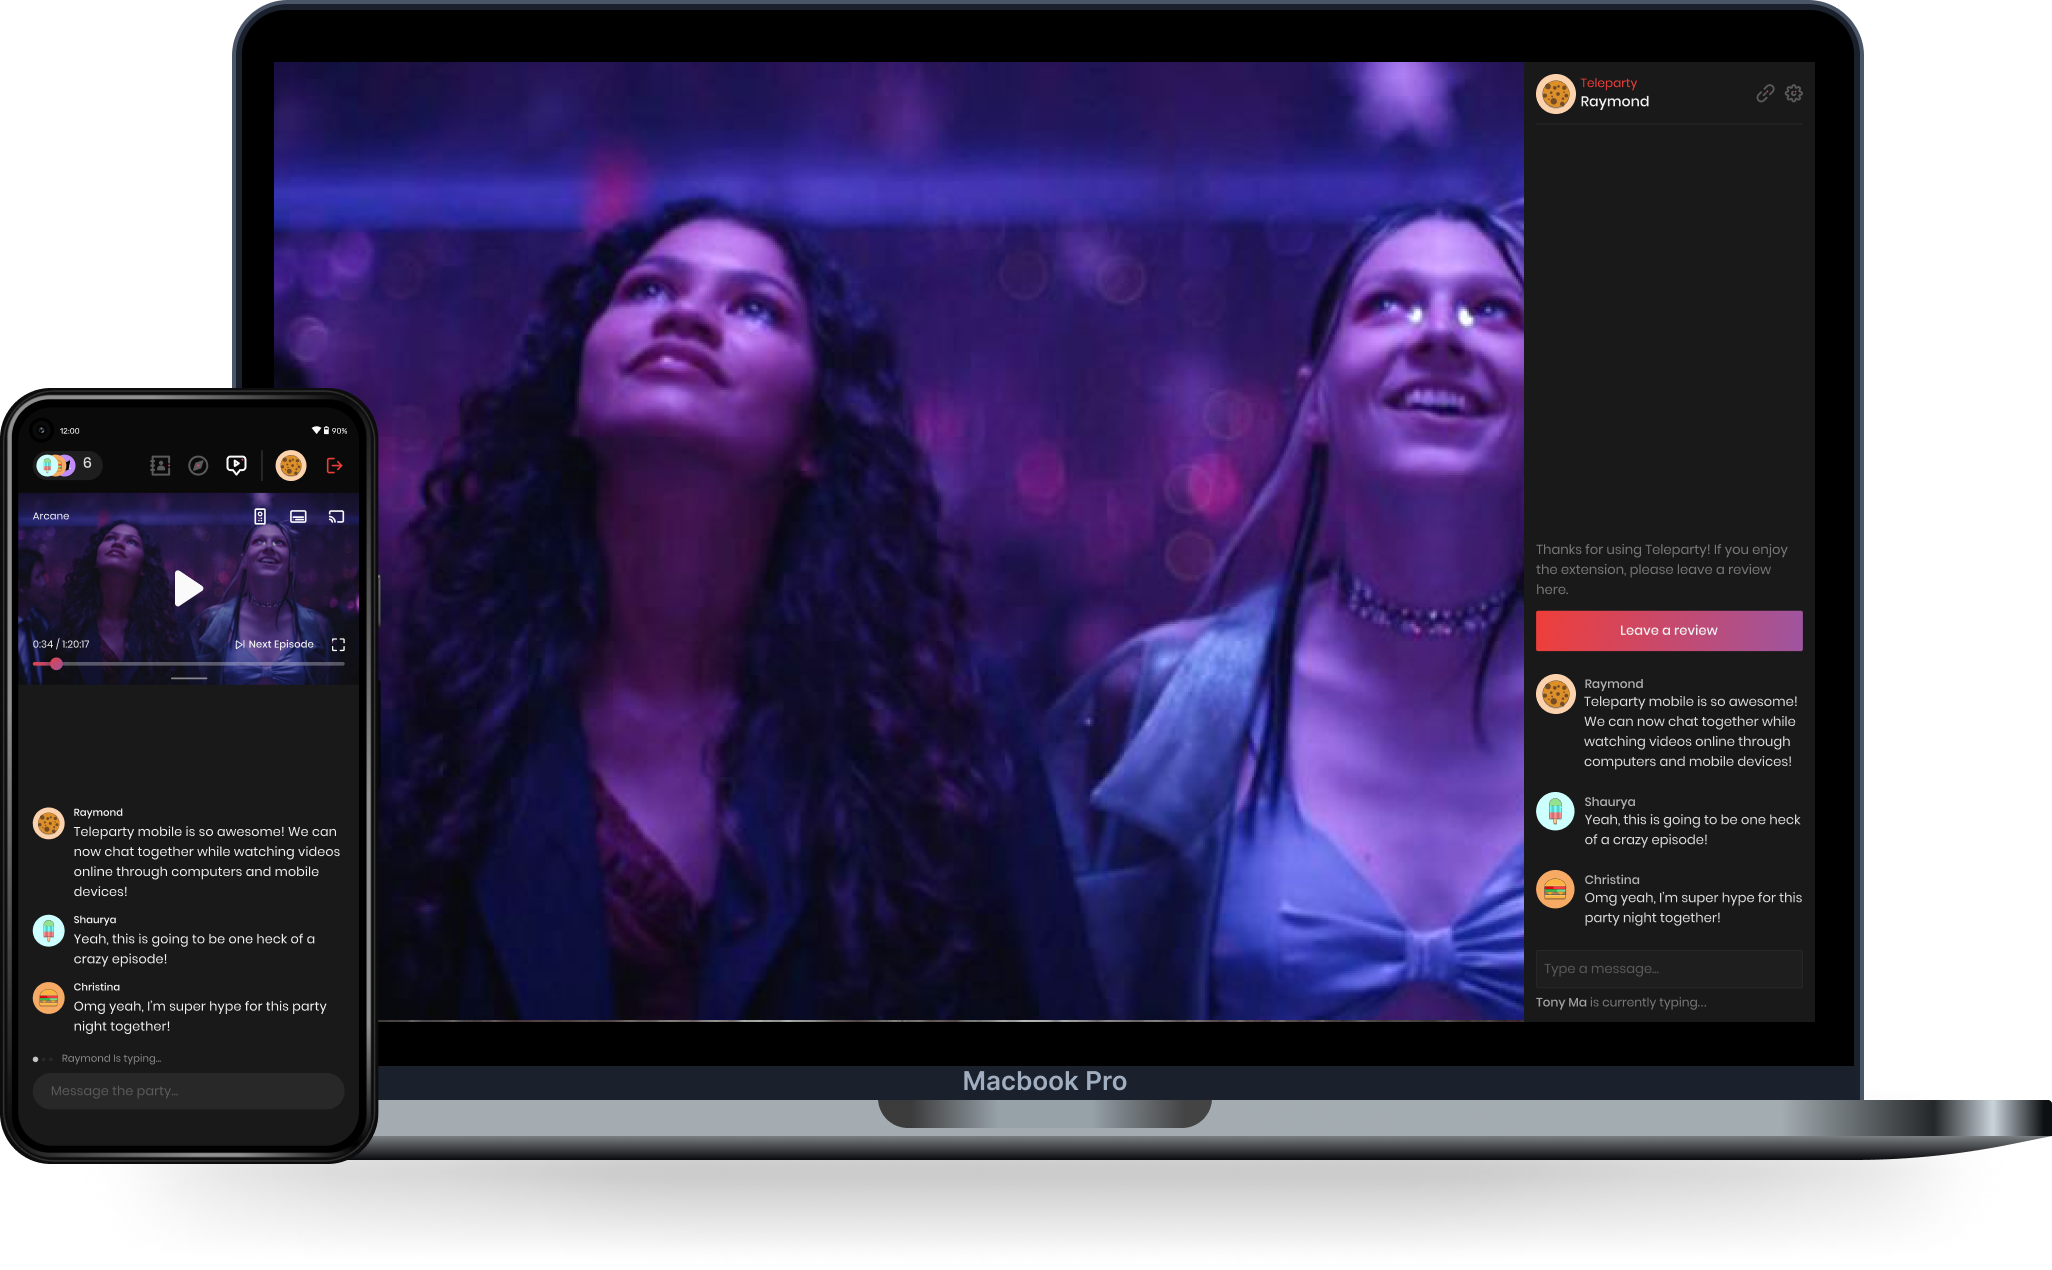 How to watch movies online with friends without leaving your home |  Technology News - The Indian Express